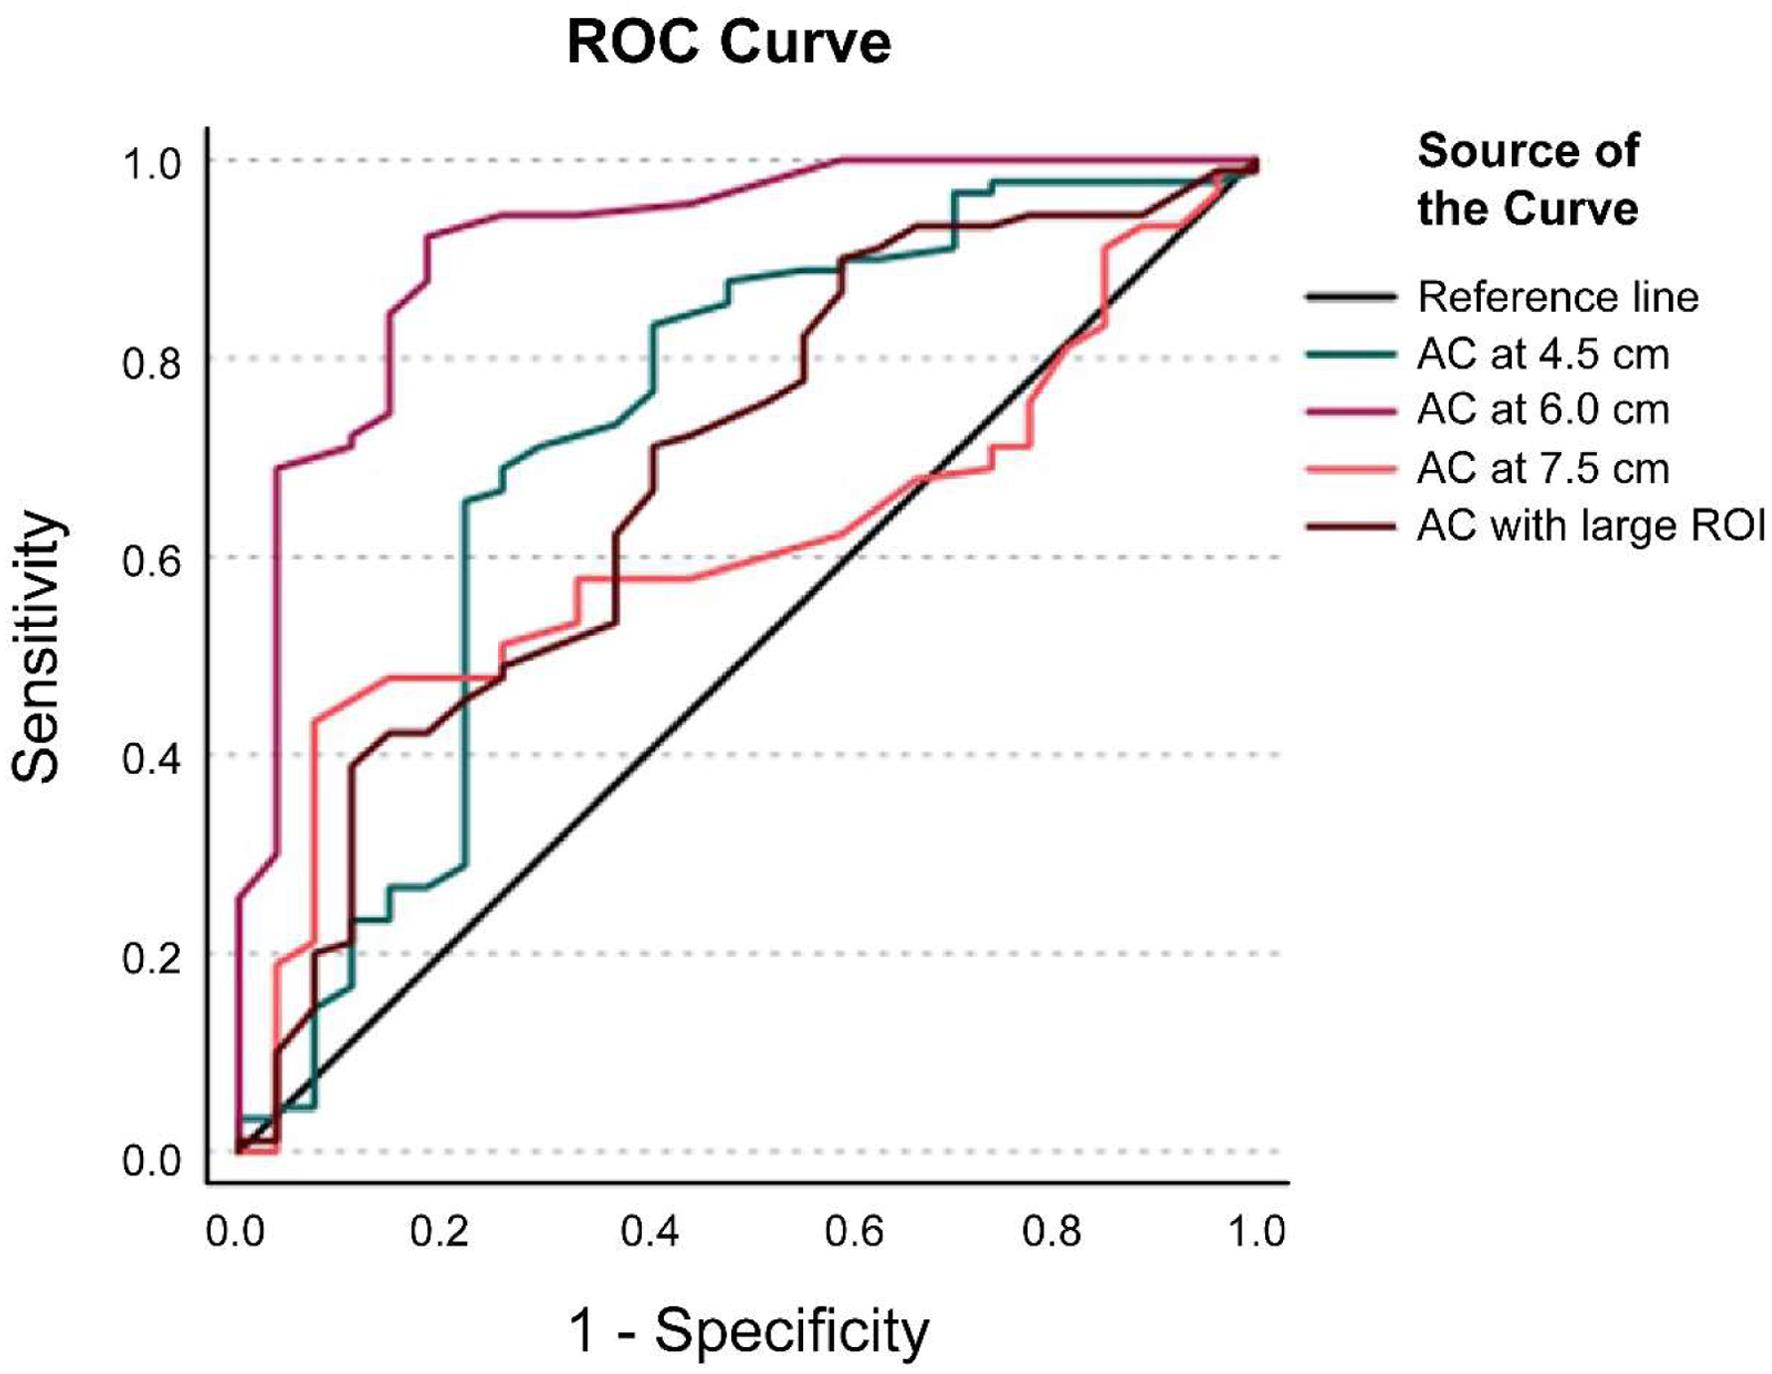 The diagnostic performance of liver attenuation coefficient (AC, dB/cm/MHz) measured at different depths and sizes of the region of interest is analyzed using the area under receiver operating characteristic curve (AUC).